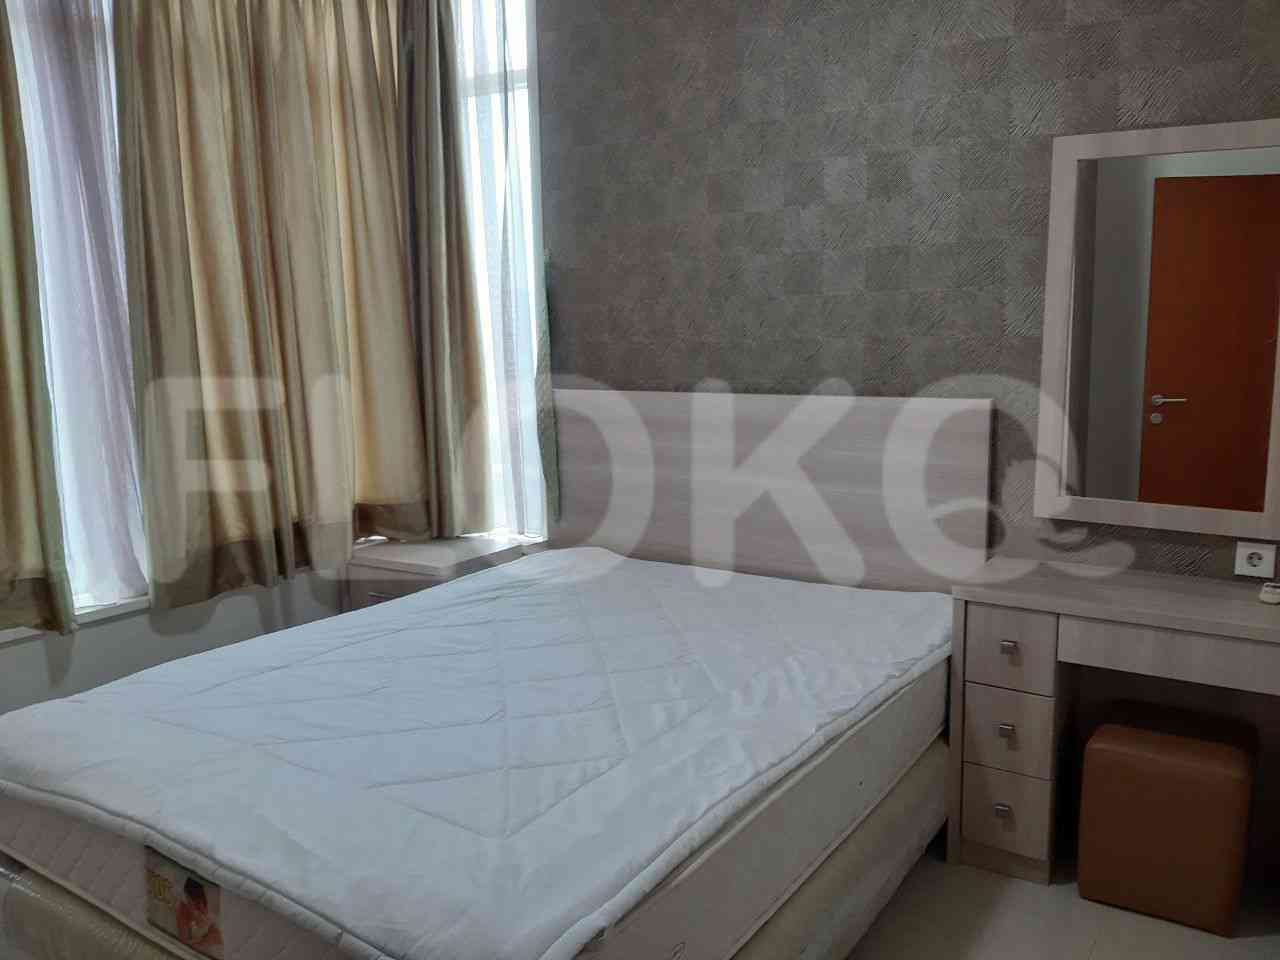 2 Bedroom on 20th Floor for Rent in Thamrin Residence Apartment - fthdbf 5